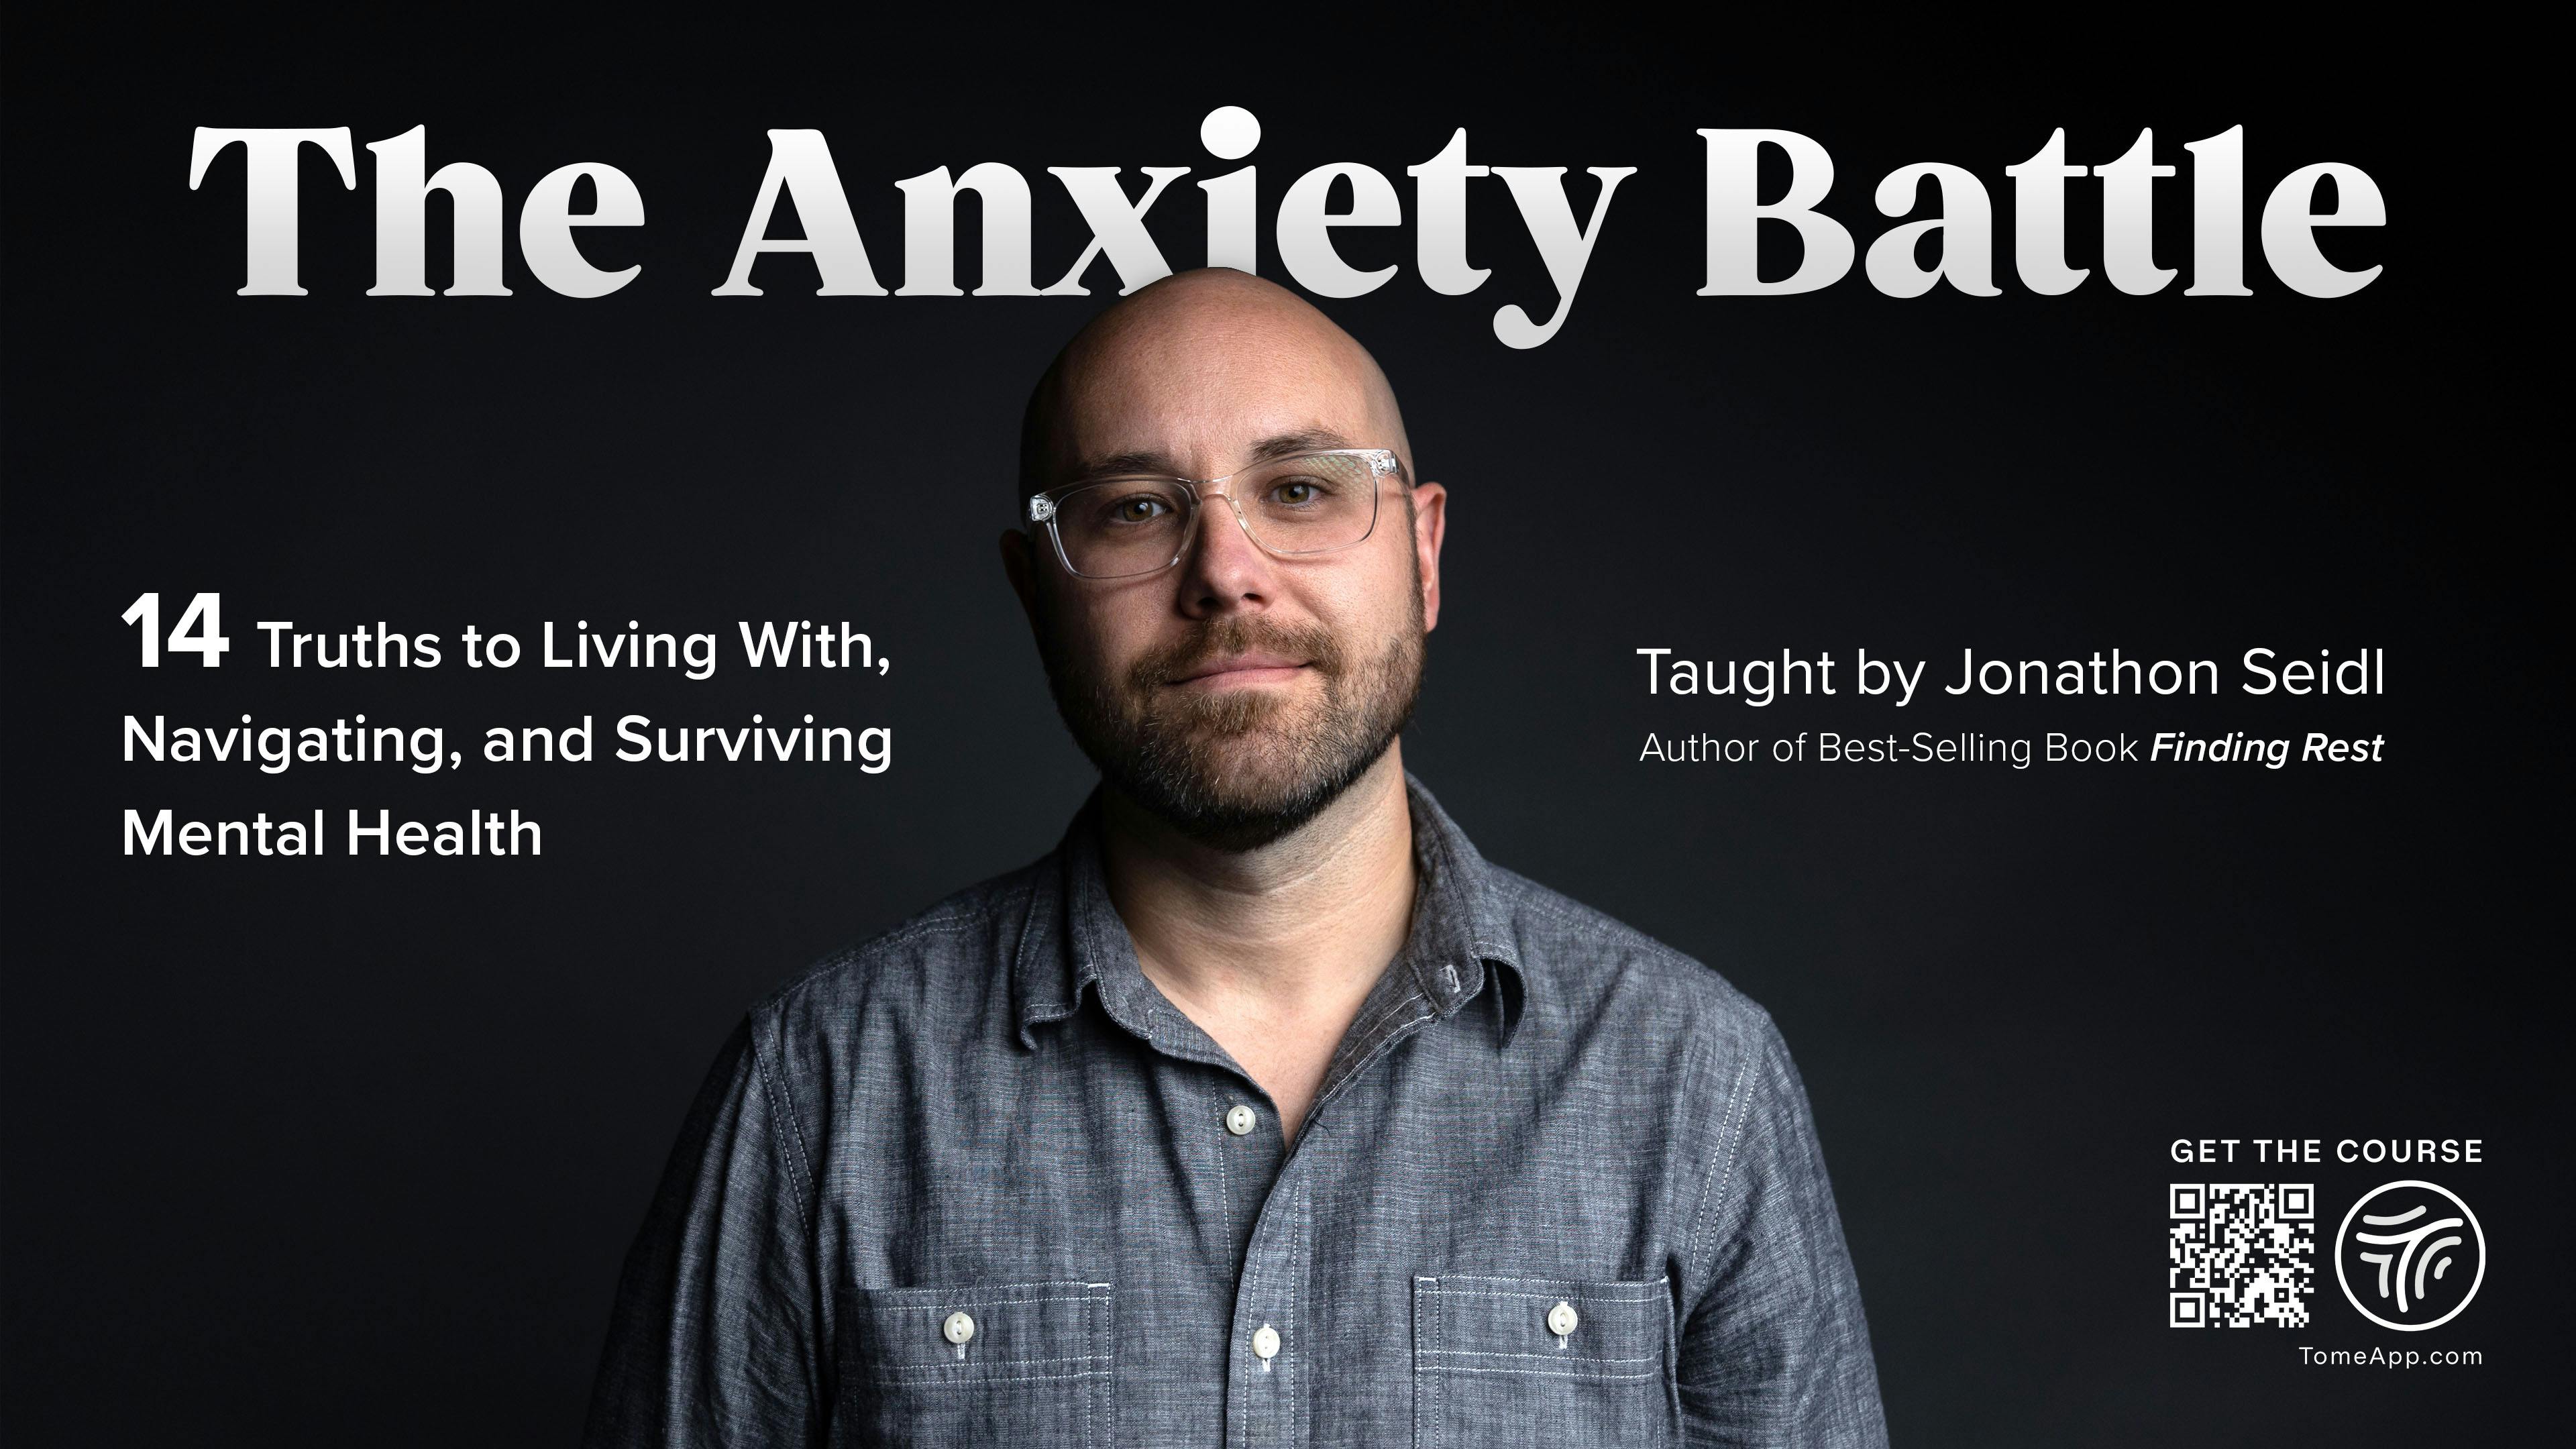 The Anxiety Battle